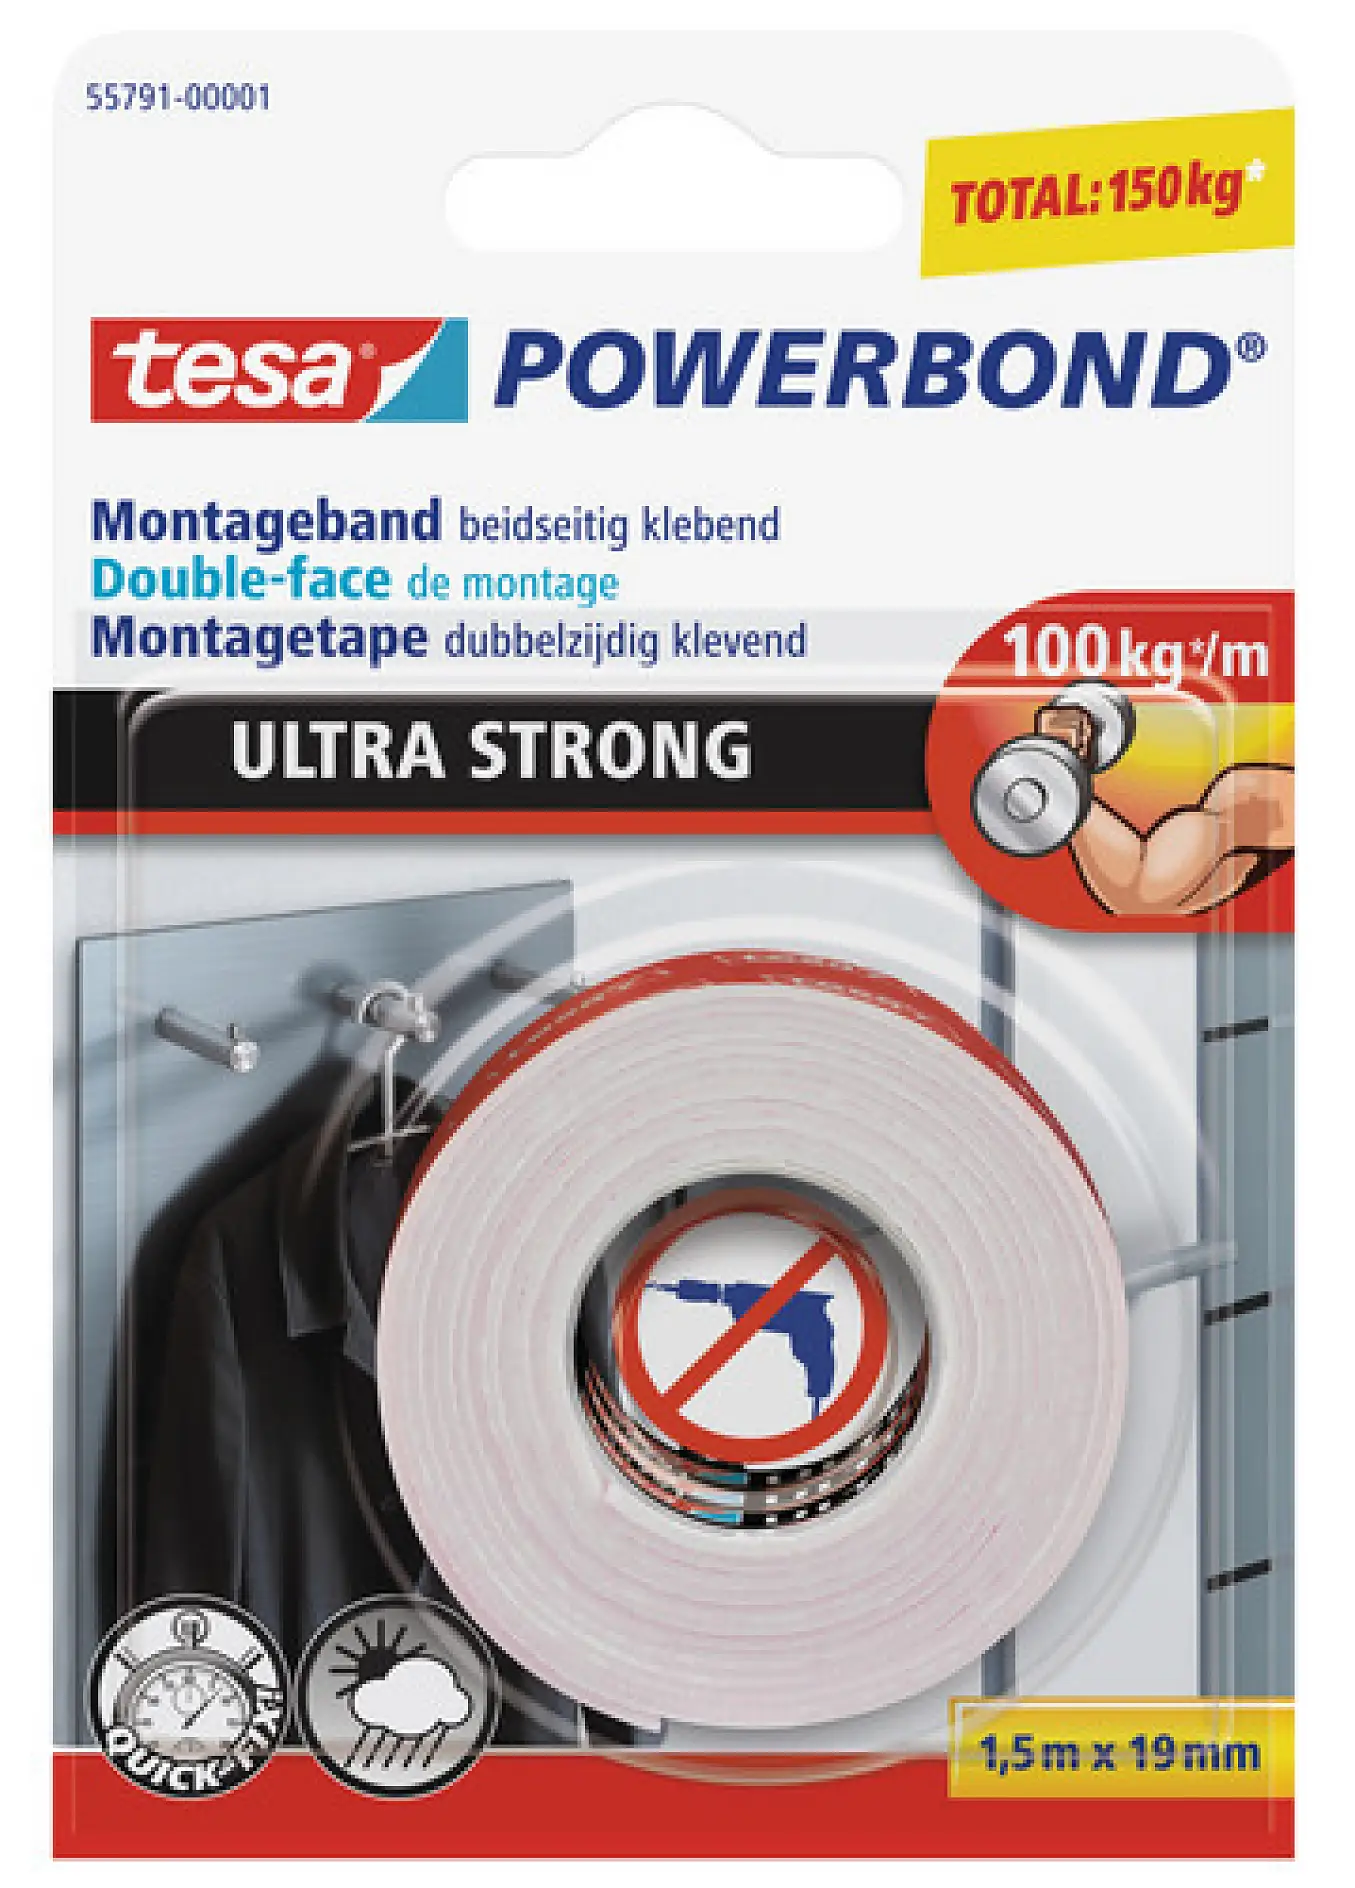 With tesa® Powerbond Ultra Strong you can hang heavy, flat objects without the need to drill or use any nails or screws. This double-sided mounting tape sticks perfectly onto firm, smooth surfaces including tiles, wood and most plastics.
It can hold objects with a thickness of up to 10 mm and a weight of up to 6 kg. In ideal conditions, a strip of just 10 cm is enough to hold a weight of up to 10 kg. Provided the tape isn't exposed to water or direct sunlight, it will give permanent, reliable ultra-strong bonding power.